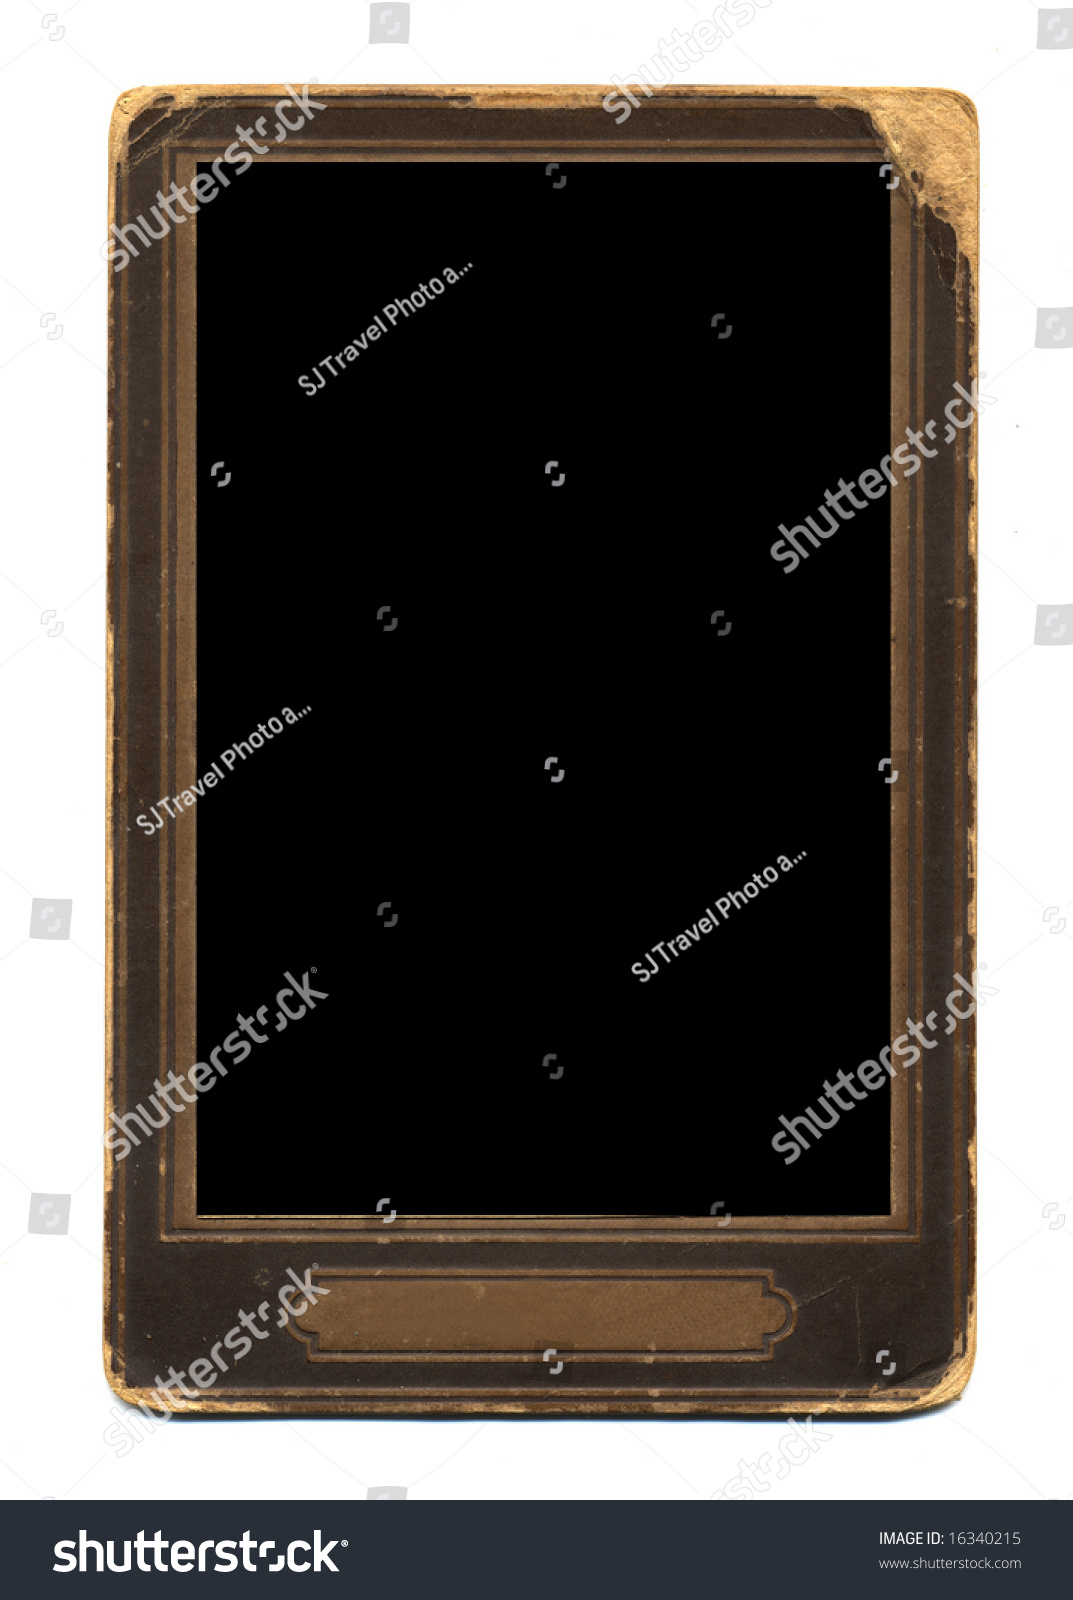 Old-Fashioned Photo Frame - 16340215 : Shutterstock